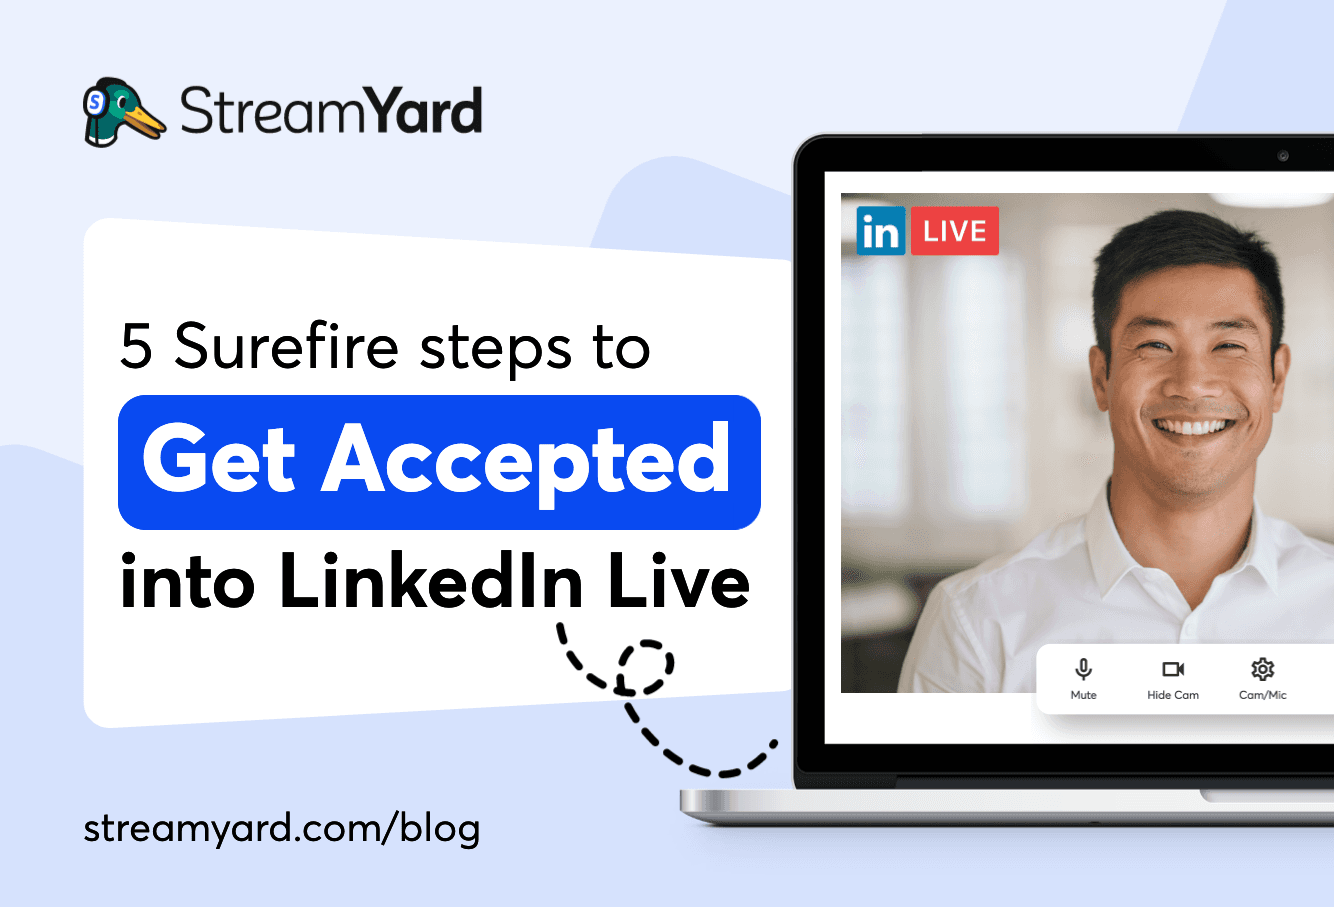 Learn how to get LinkedIn Live access so that you can start streaming in front of business owners in the B2B and B2C space with this guide.